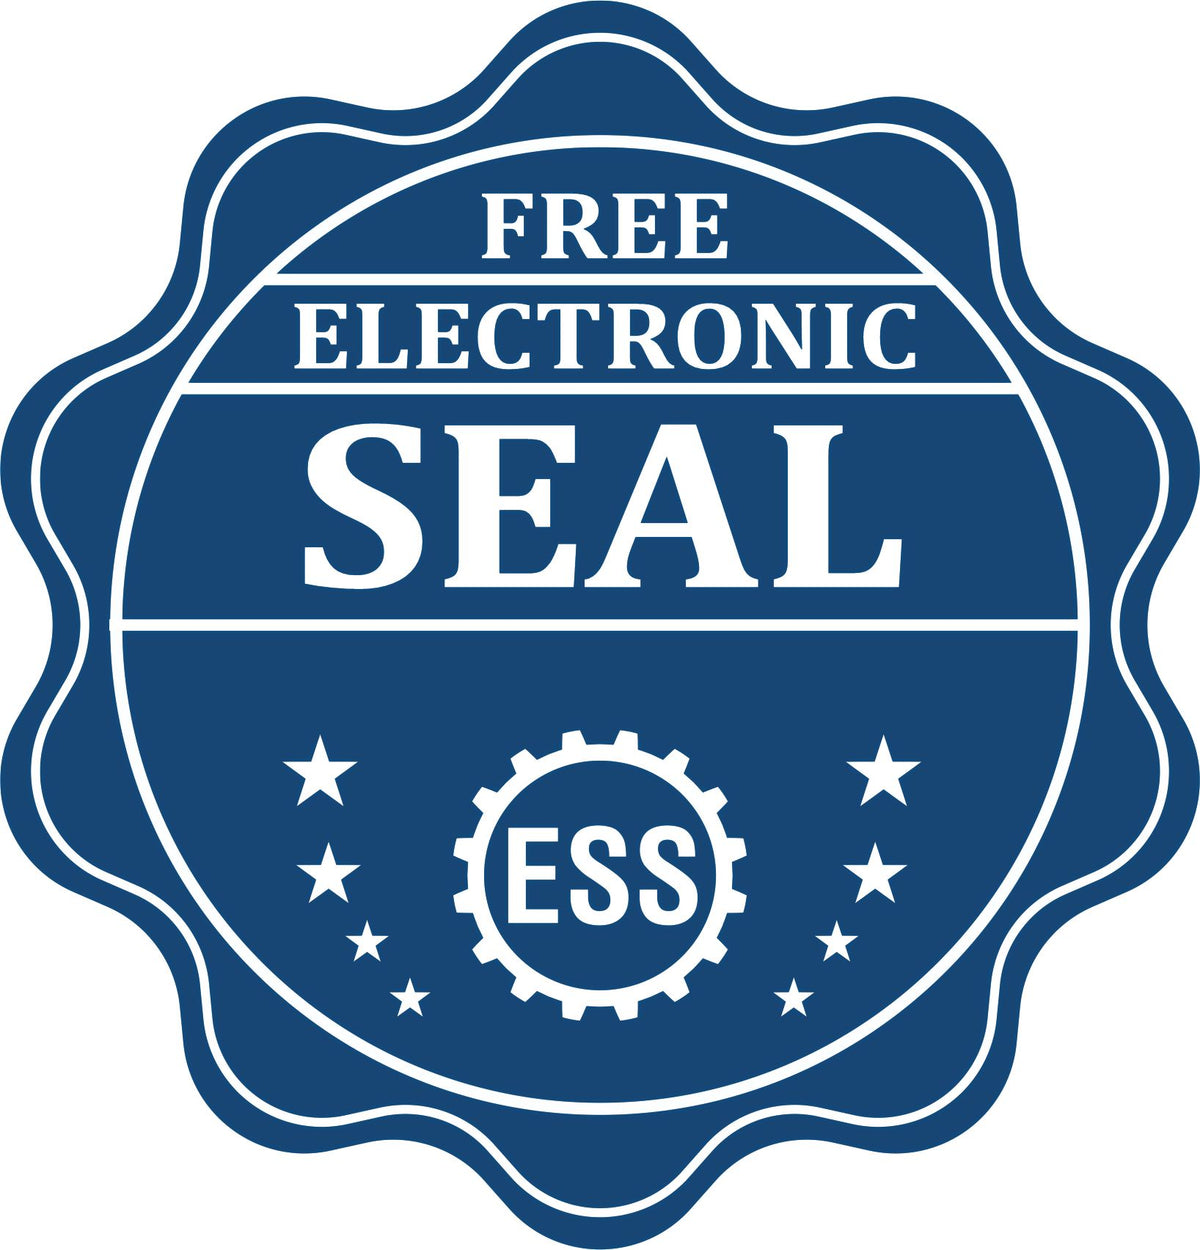 A badge showing a free electronic seal for the Gift Indiana Landscape Architect Seal with stars and the ESS gear on the emblem.